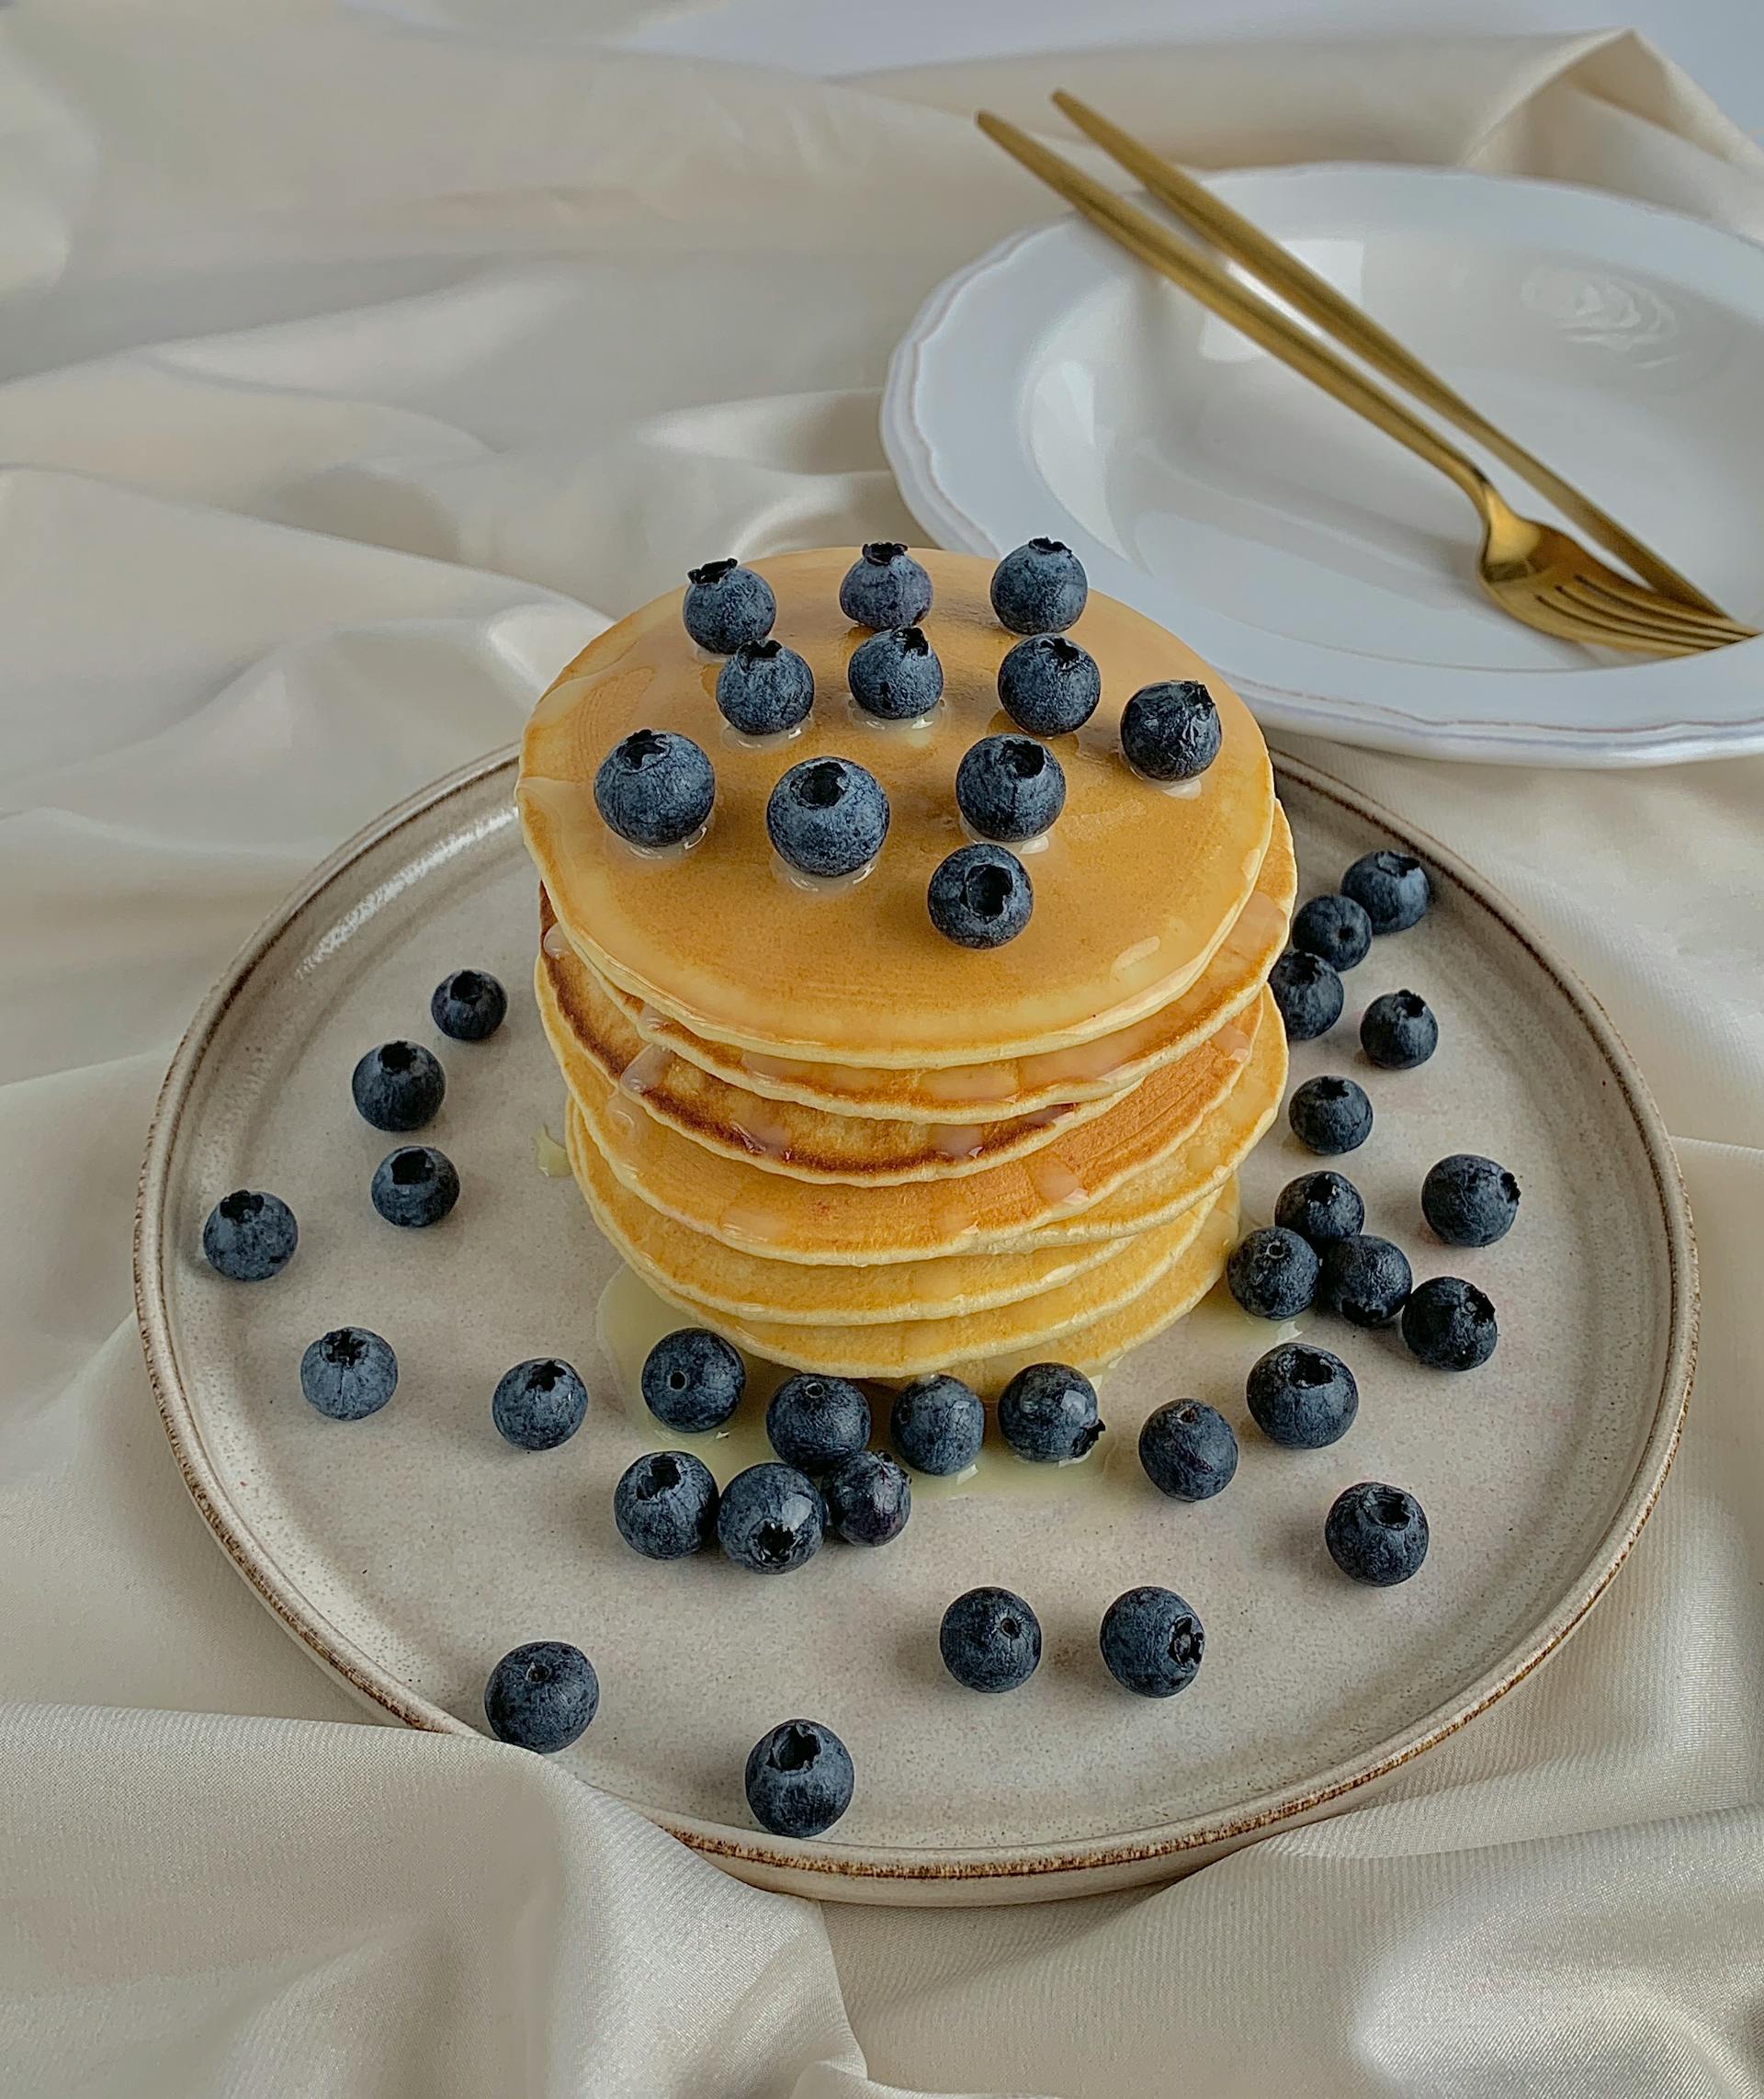 Pancakes with blueberries | Source: Pexels